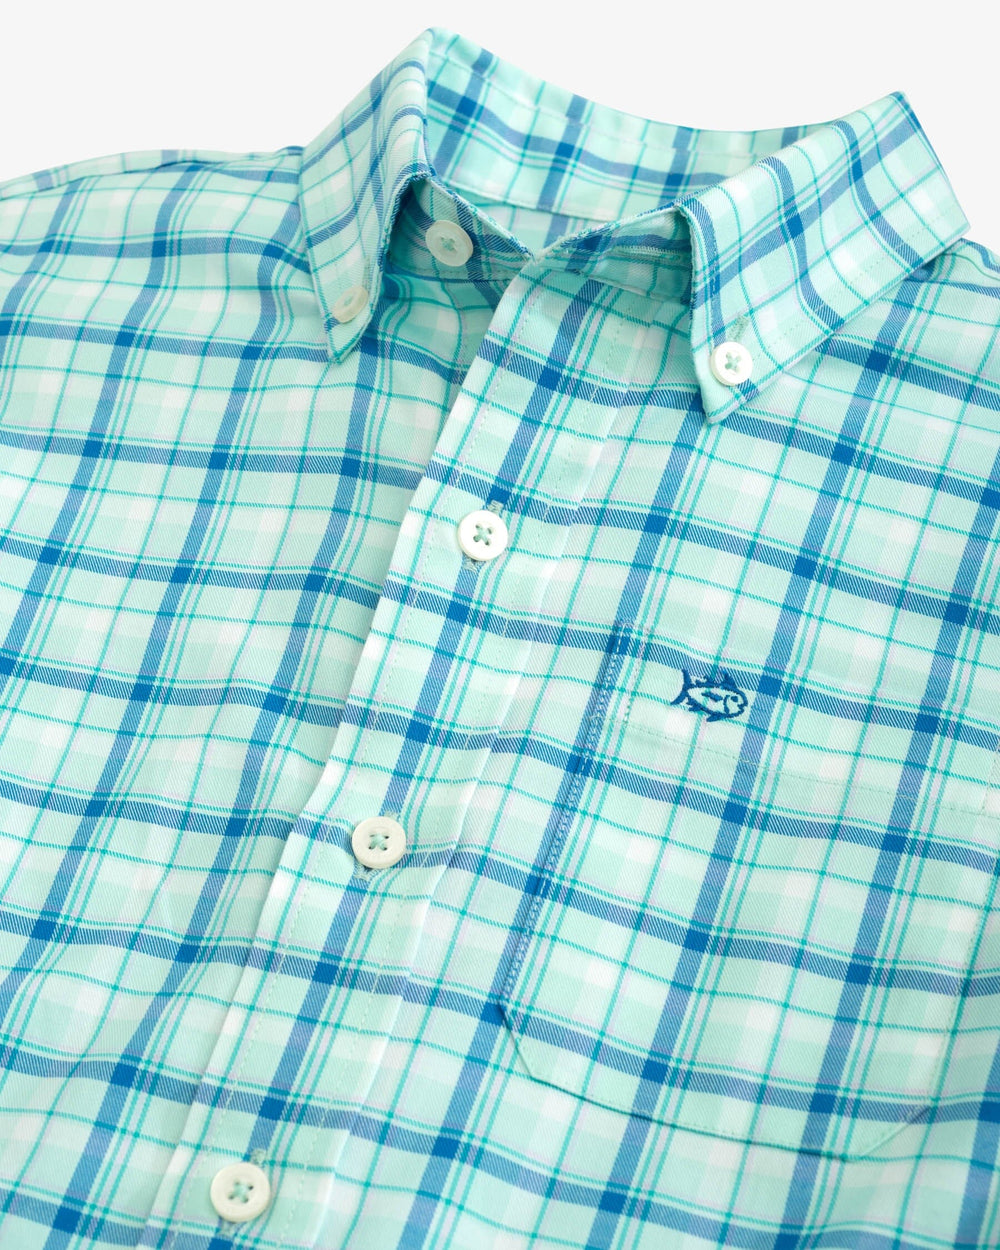 The detail view of the Southern Tide Boys Skipjack Palermo Plaid Sport Shirt by Southern Tide - Baltic Teal